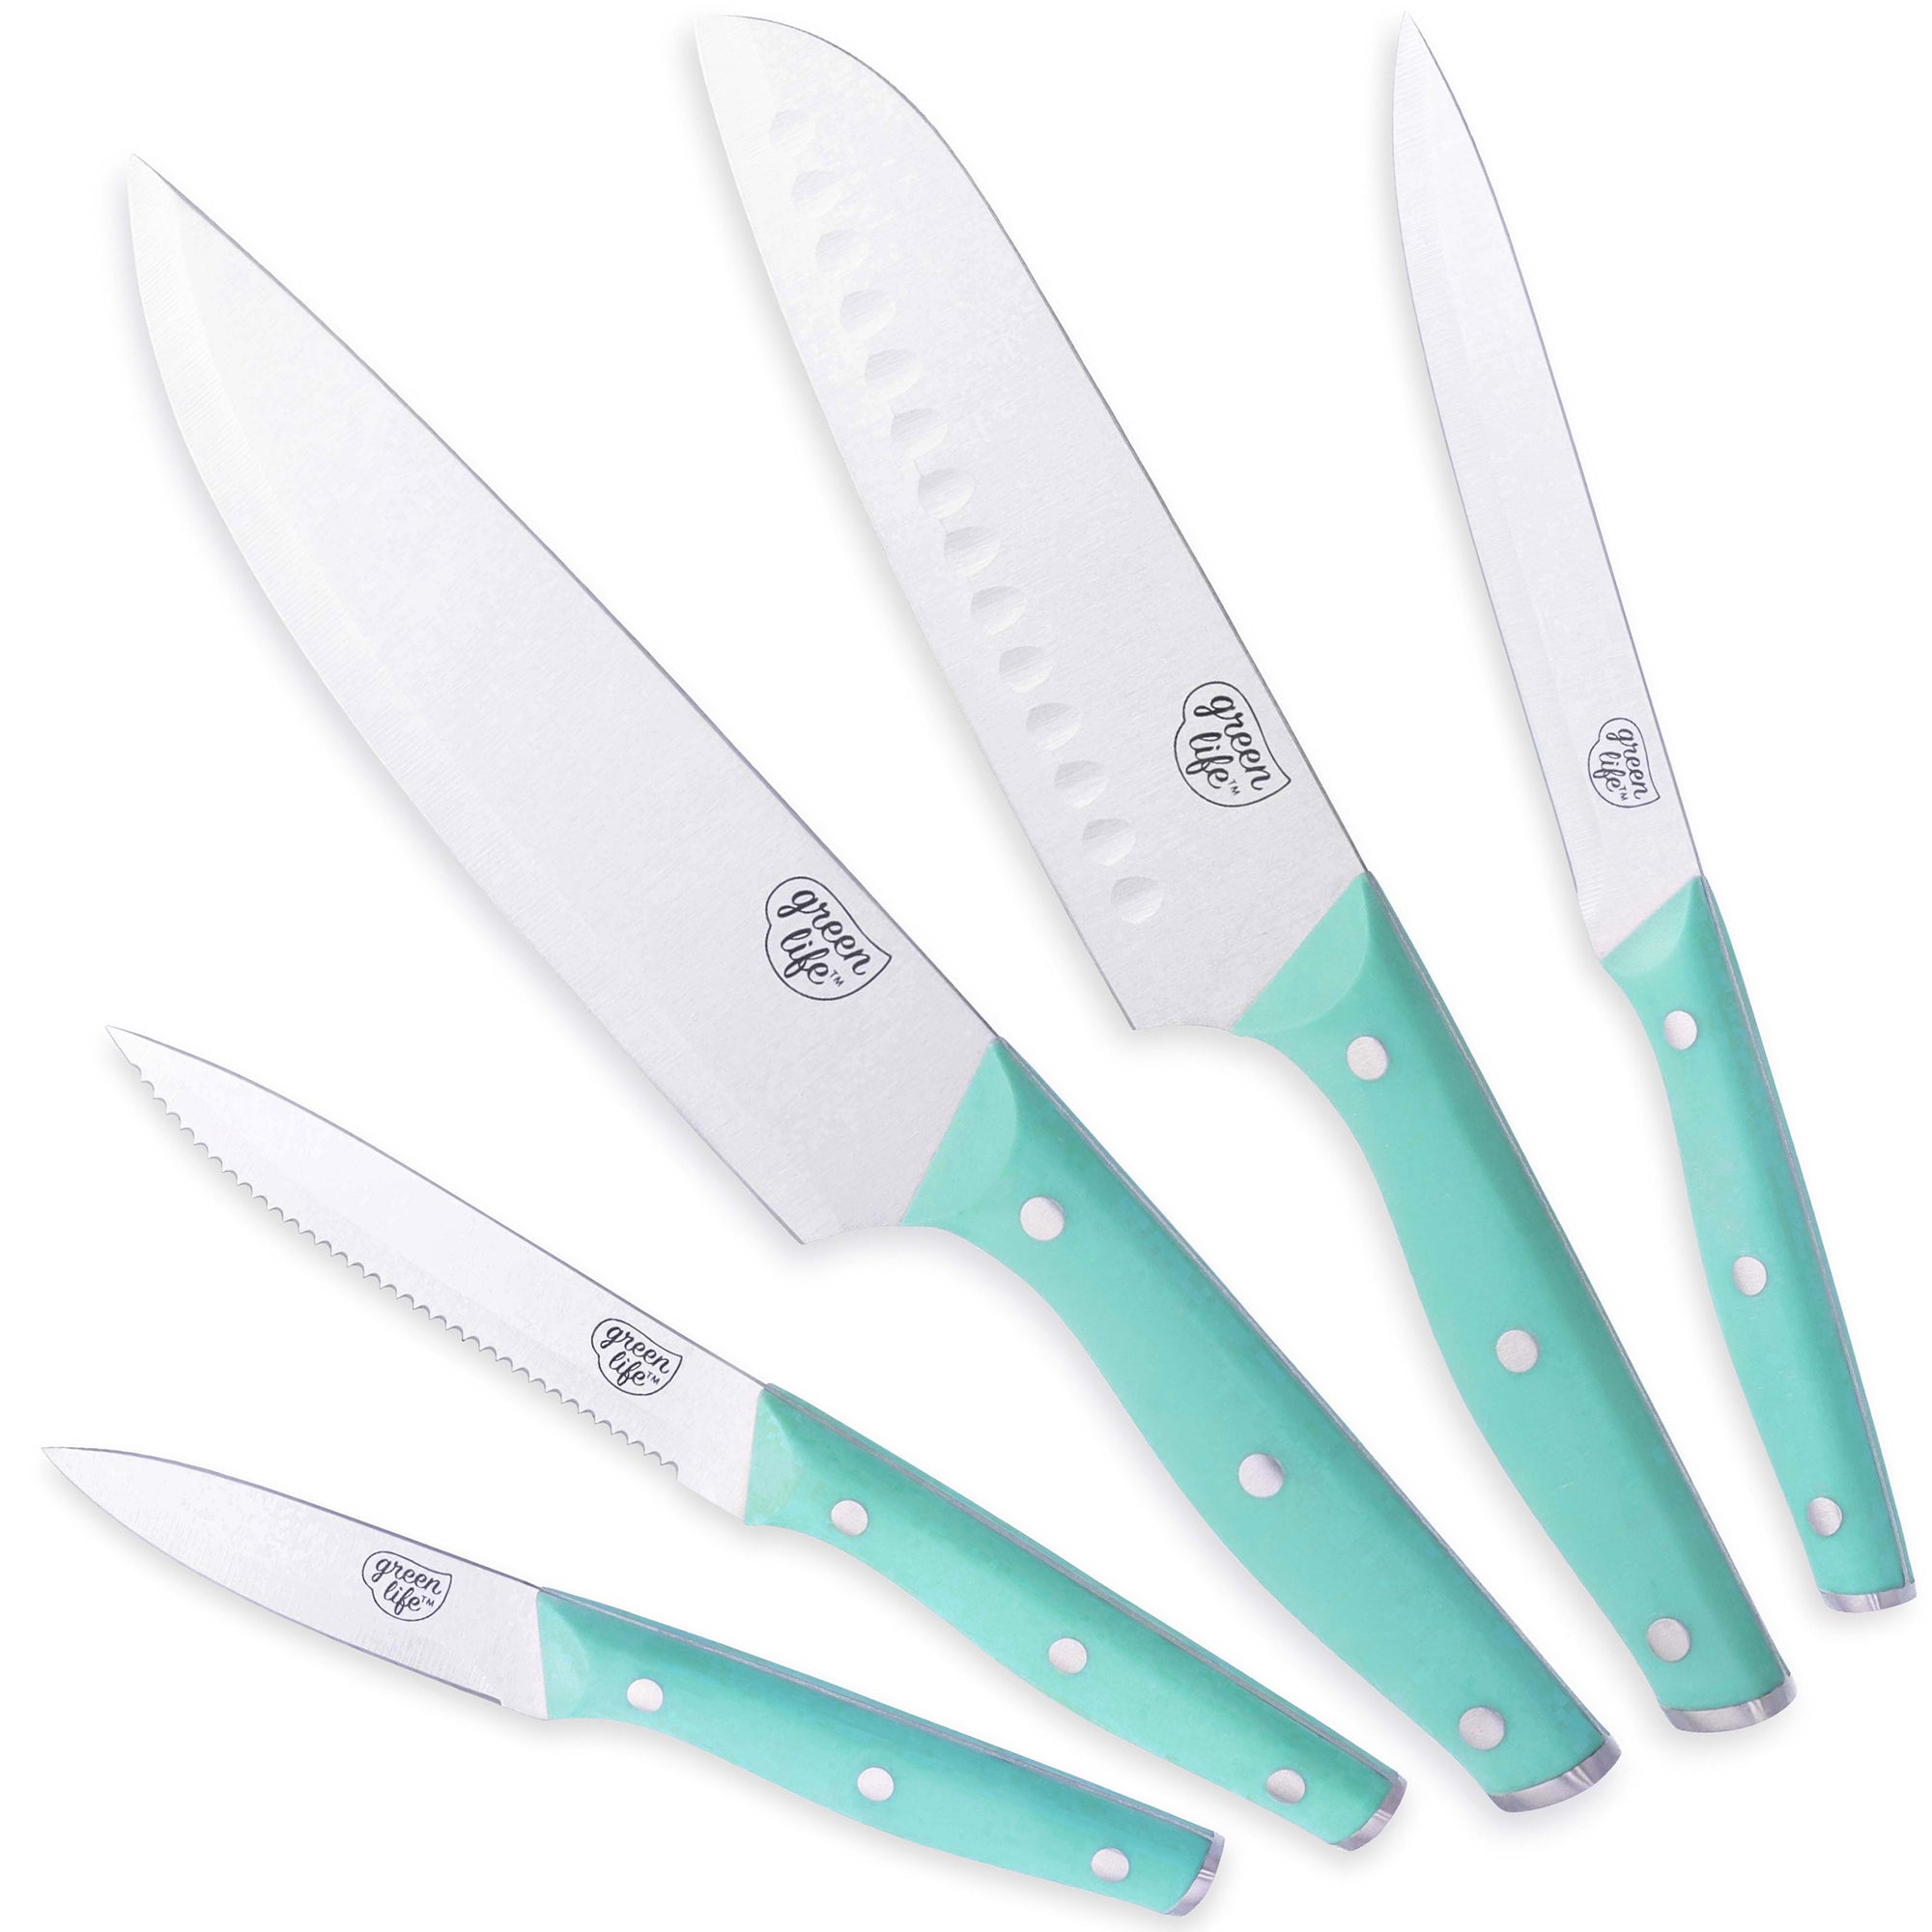 Pioneer Woman Turquoise Cutlery Set of 7 Knives, Sharpener